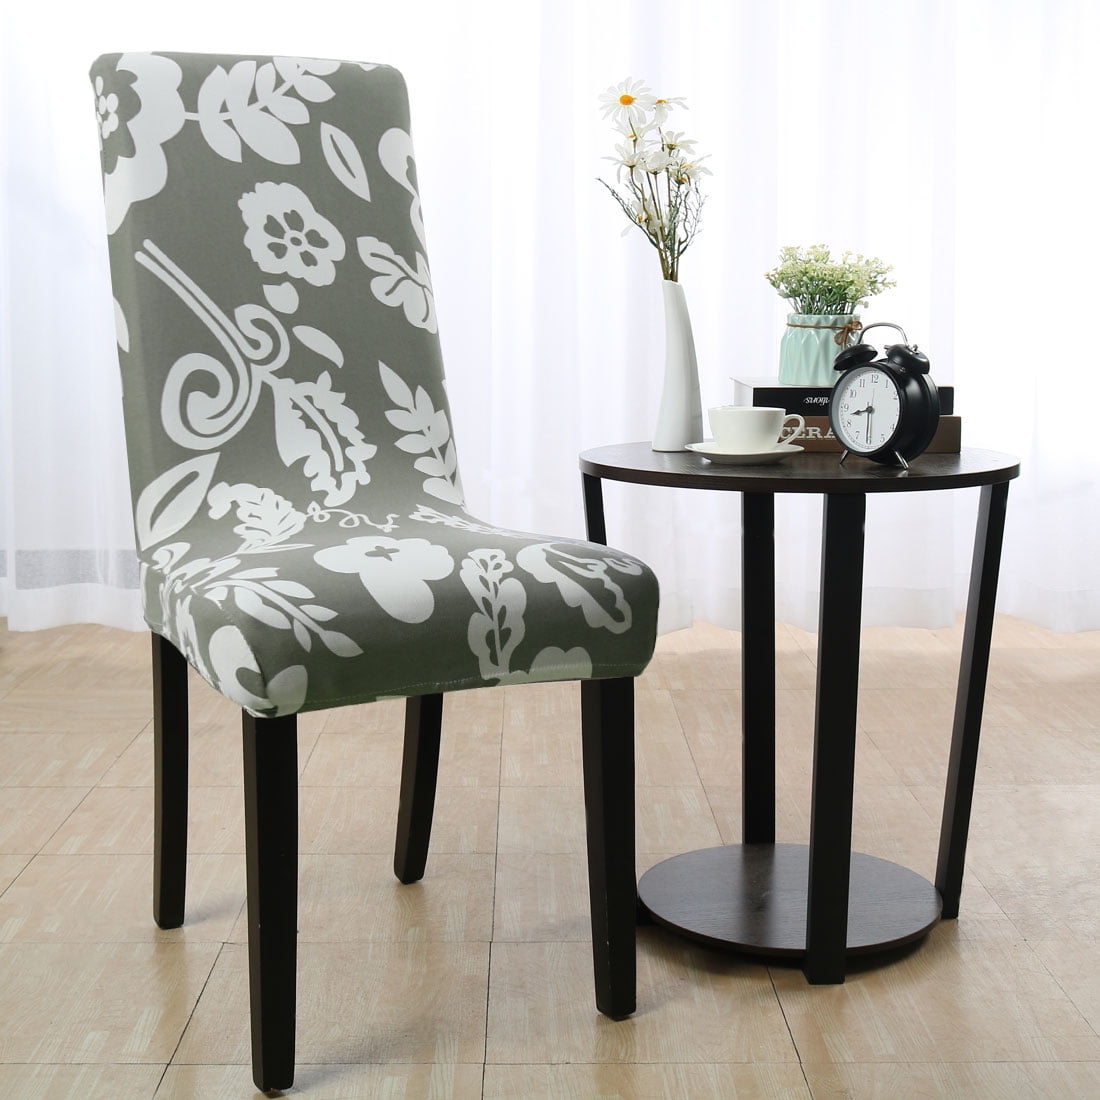 Stretchy Removable Washable Dining Chair Cover Protector Seat Slipcover